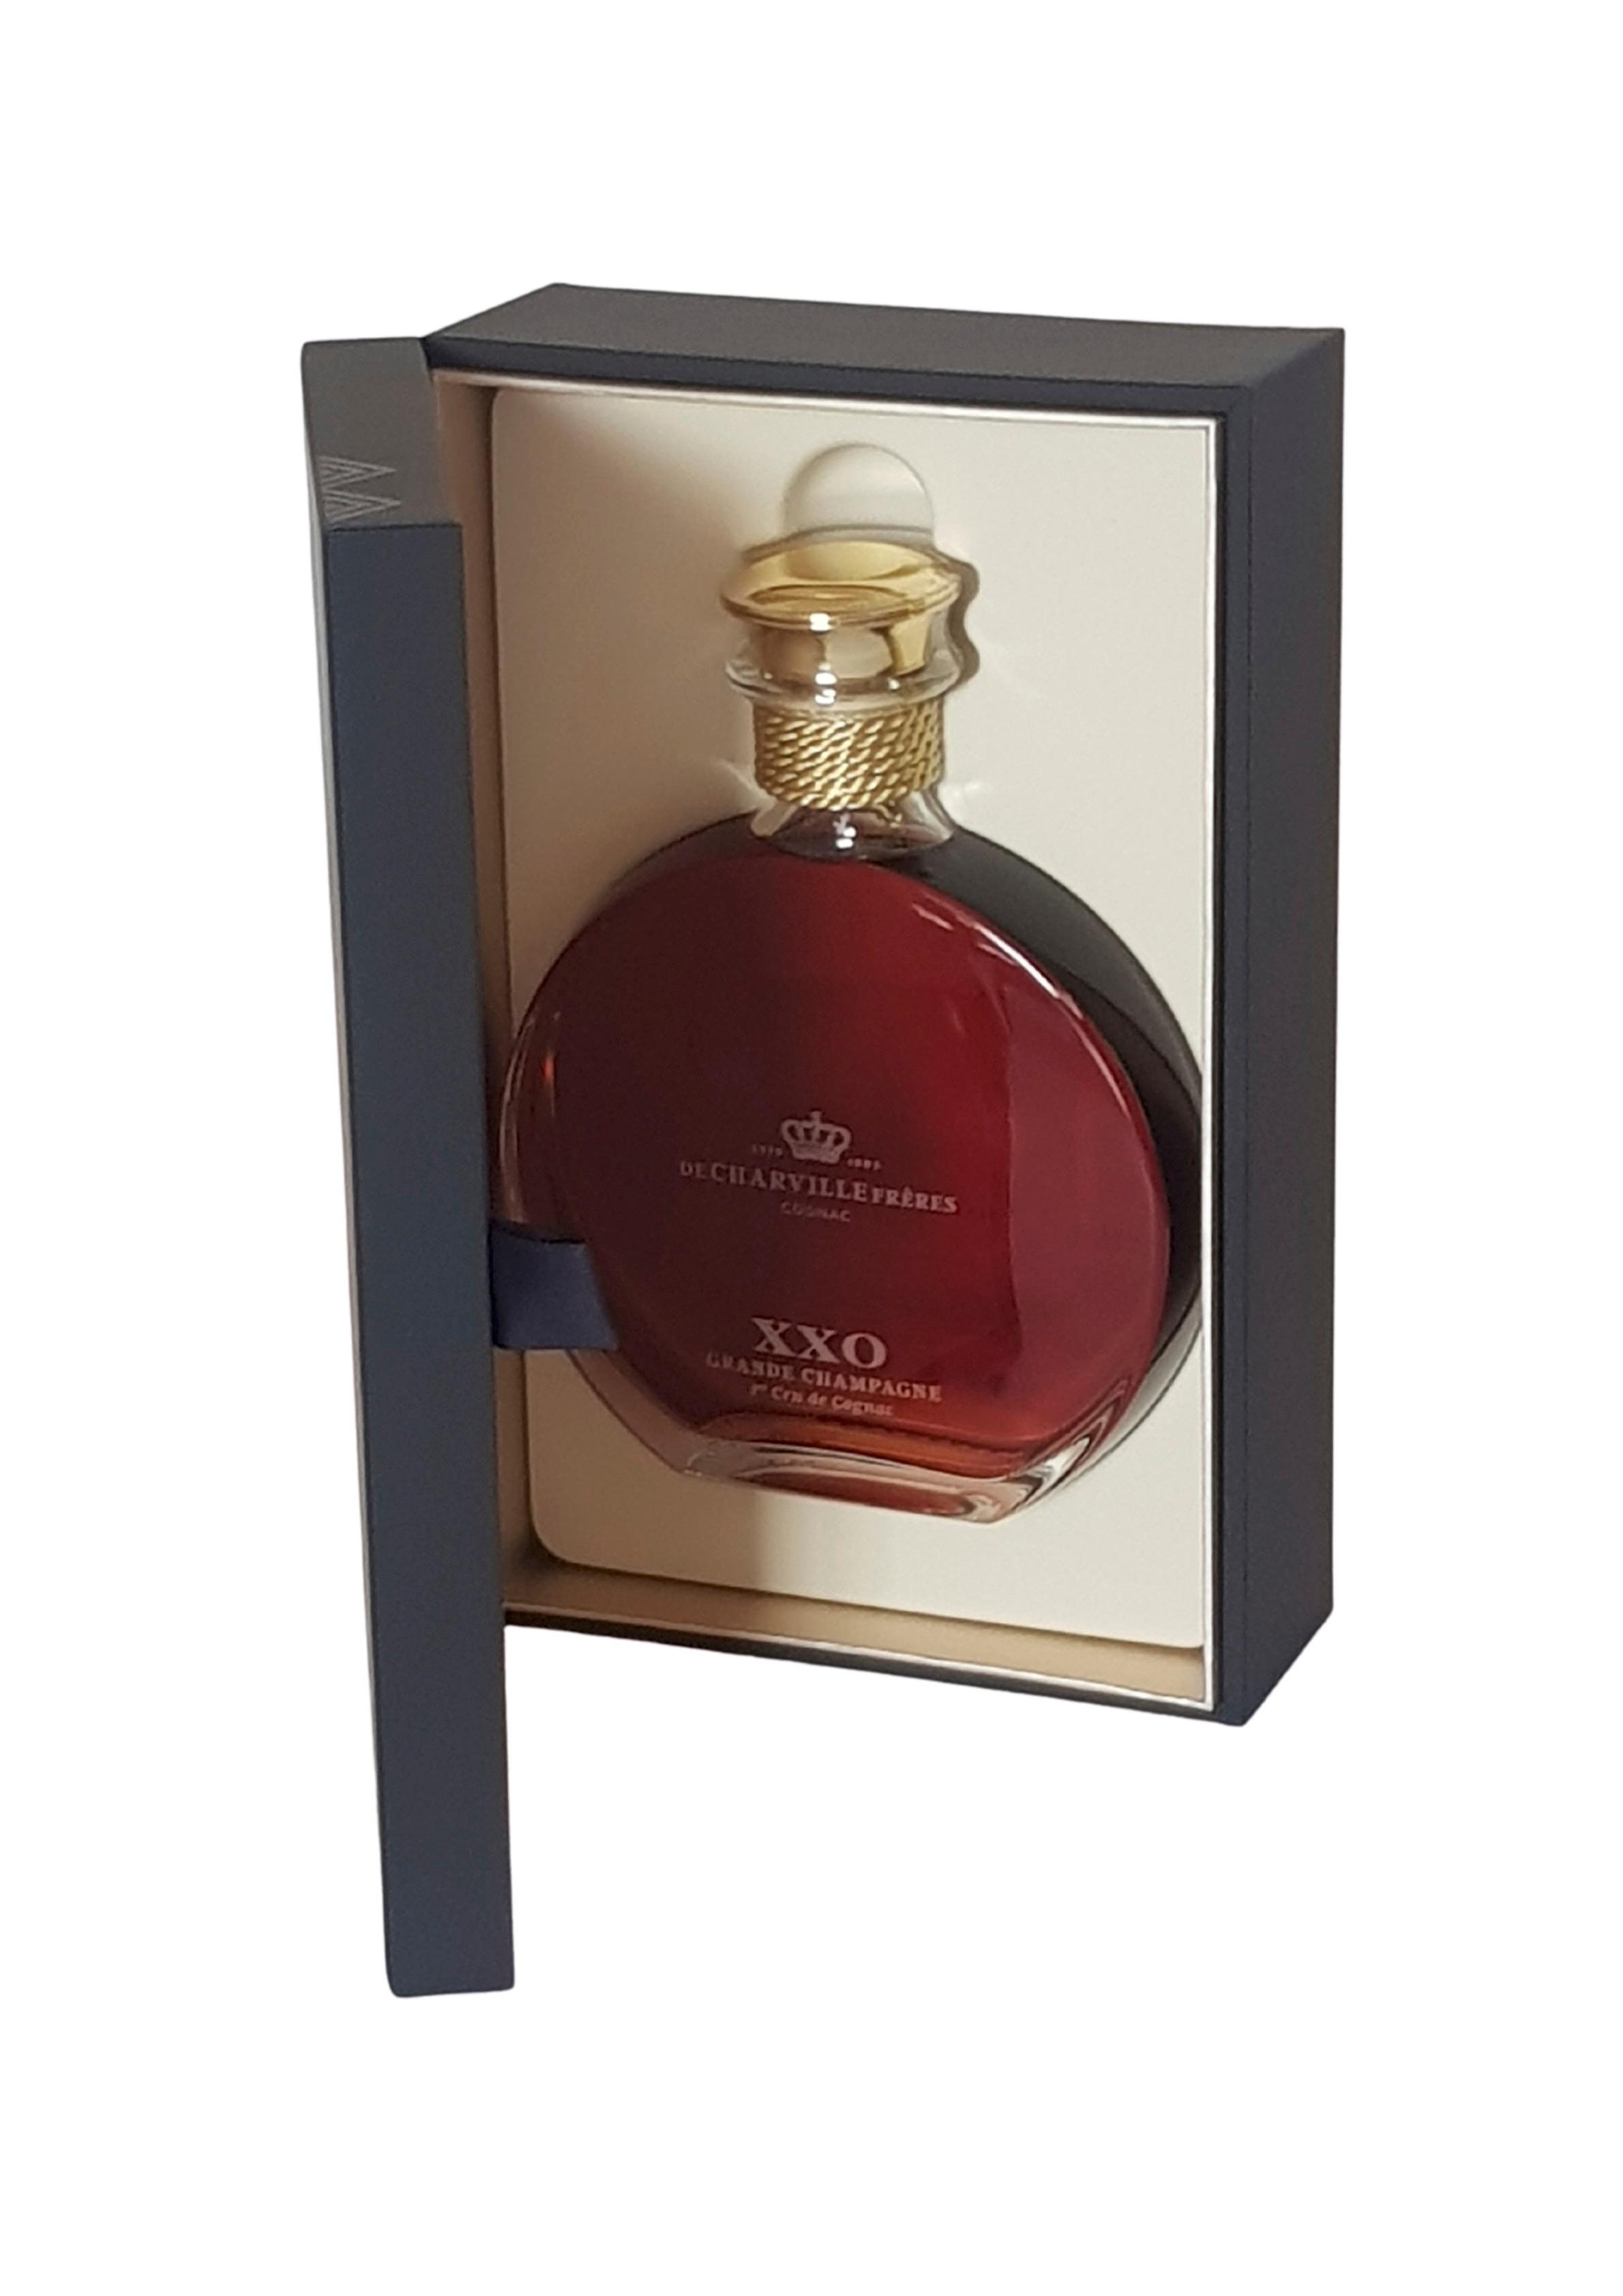 Cognac Extra Extra Old Single Estate Grande Champagne